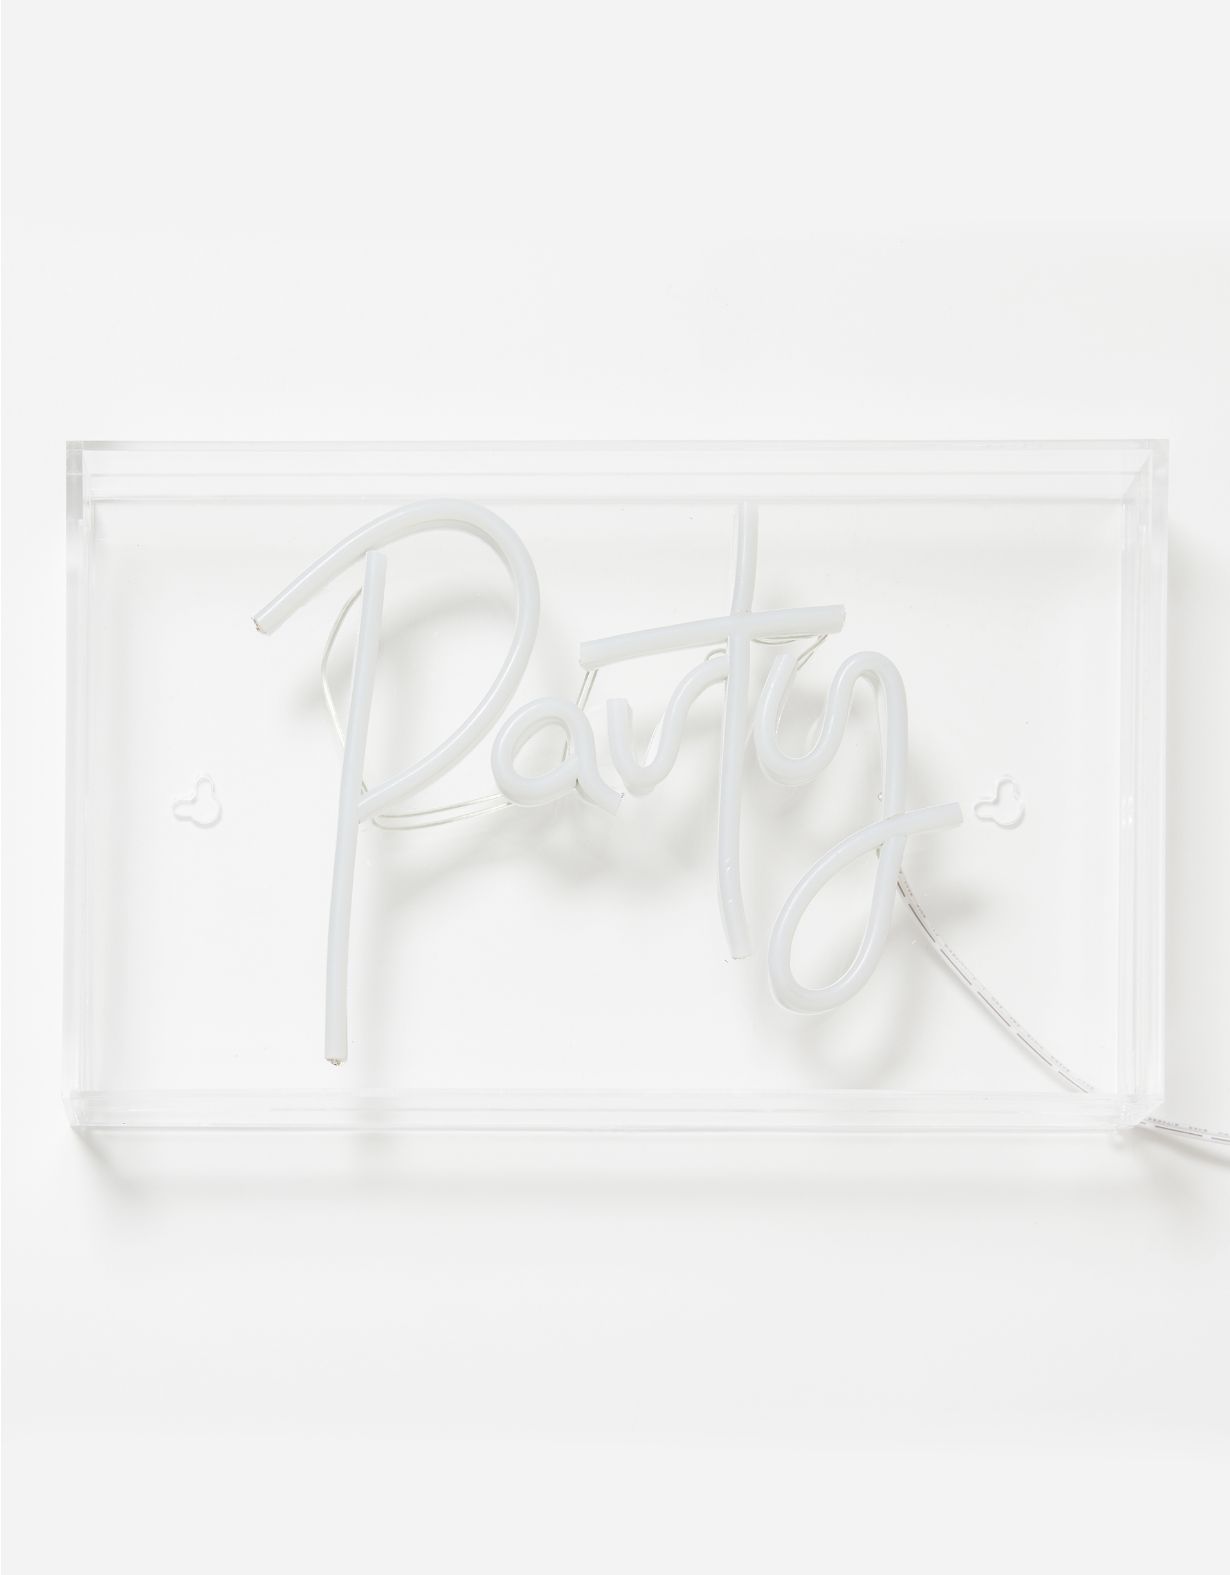 Dormify Party Neon Sign